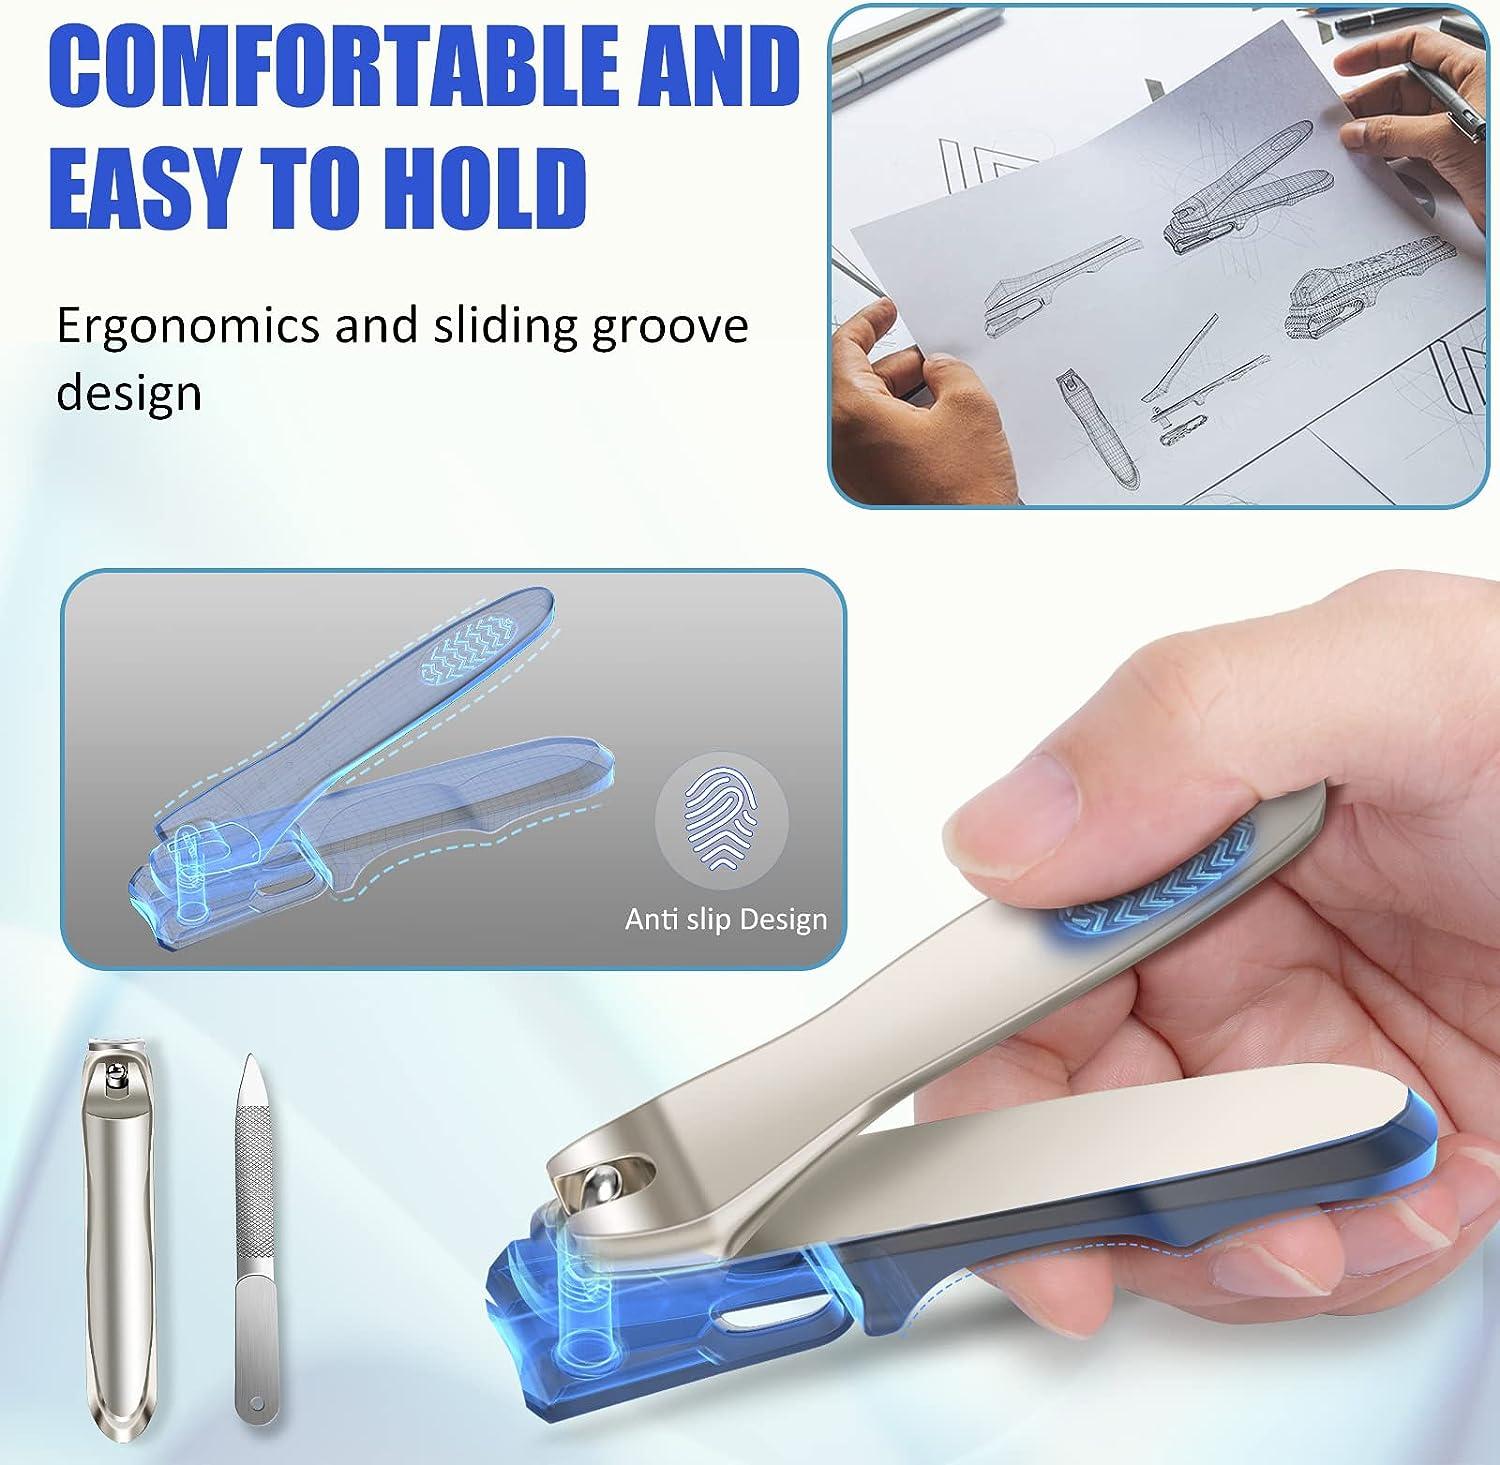 Nail Clippers for Men - DRMODE 360 Degree Rotary Pakistan